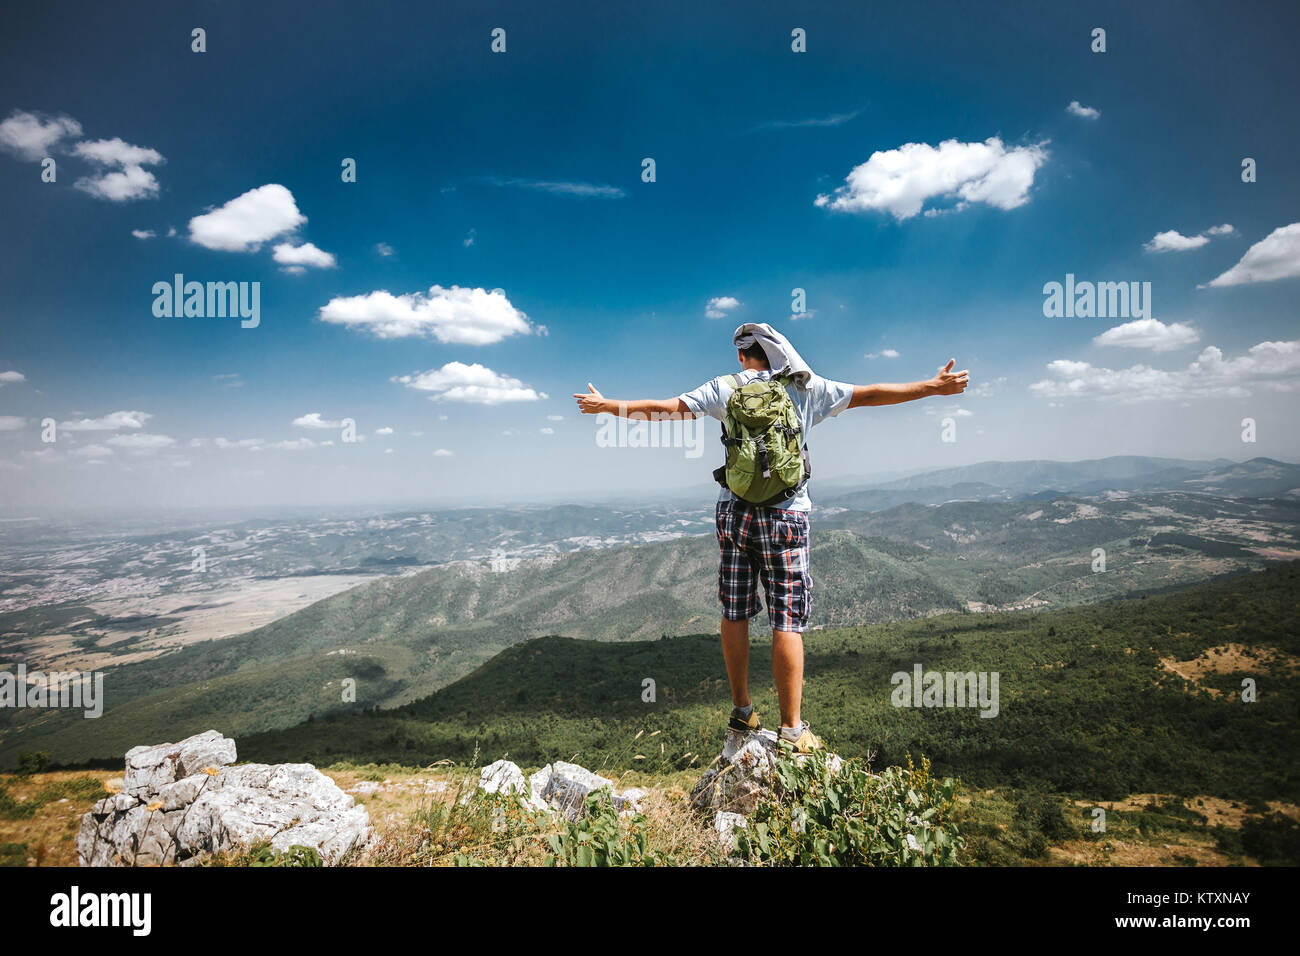 Male climb at the top of mountain, celebrating success. Stock Photo